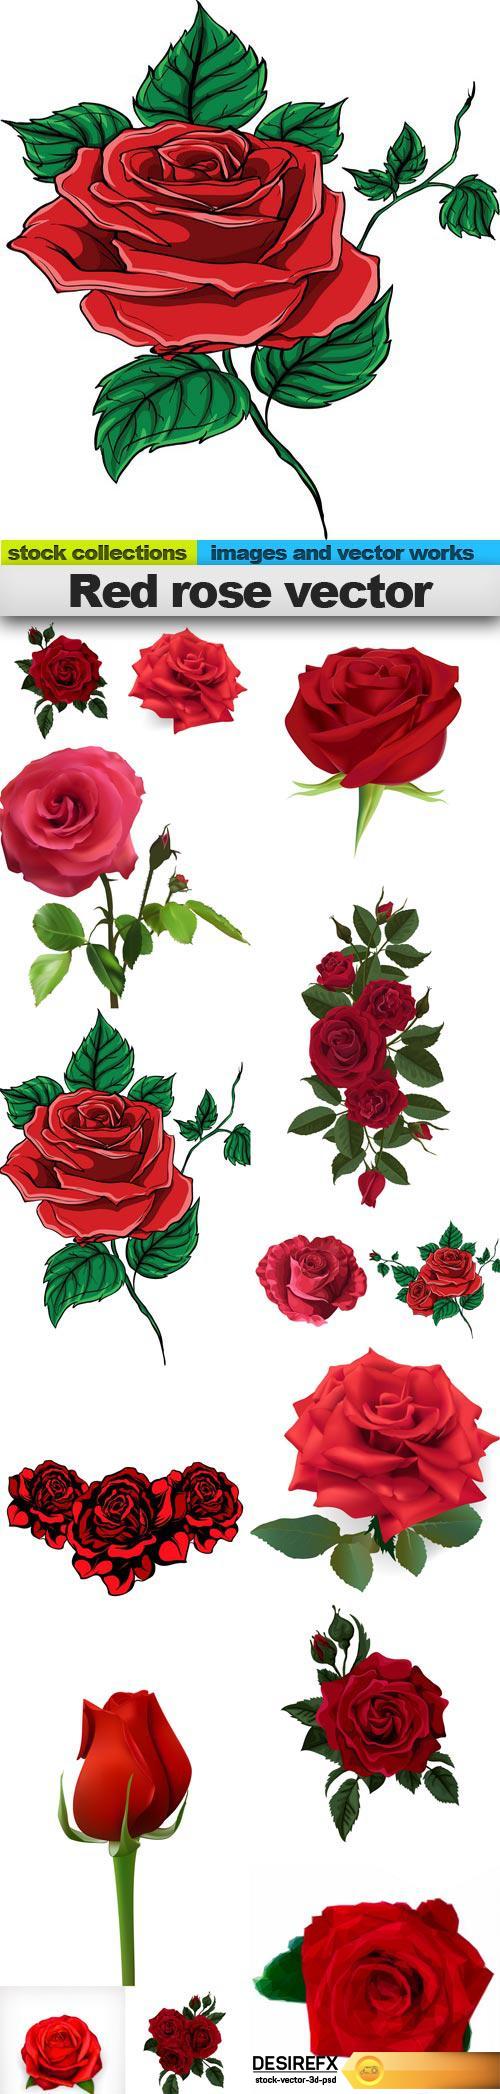 Red rose vector, 15 x EPS